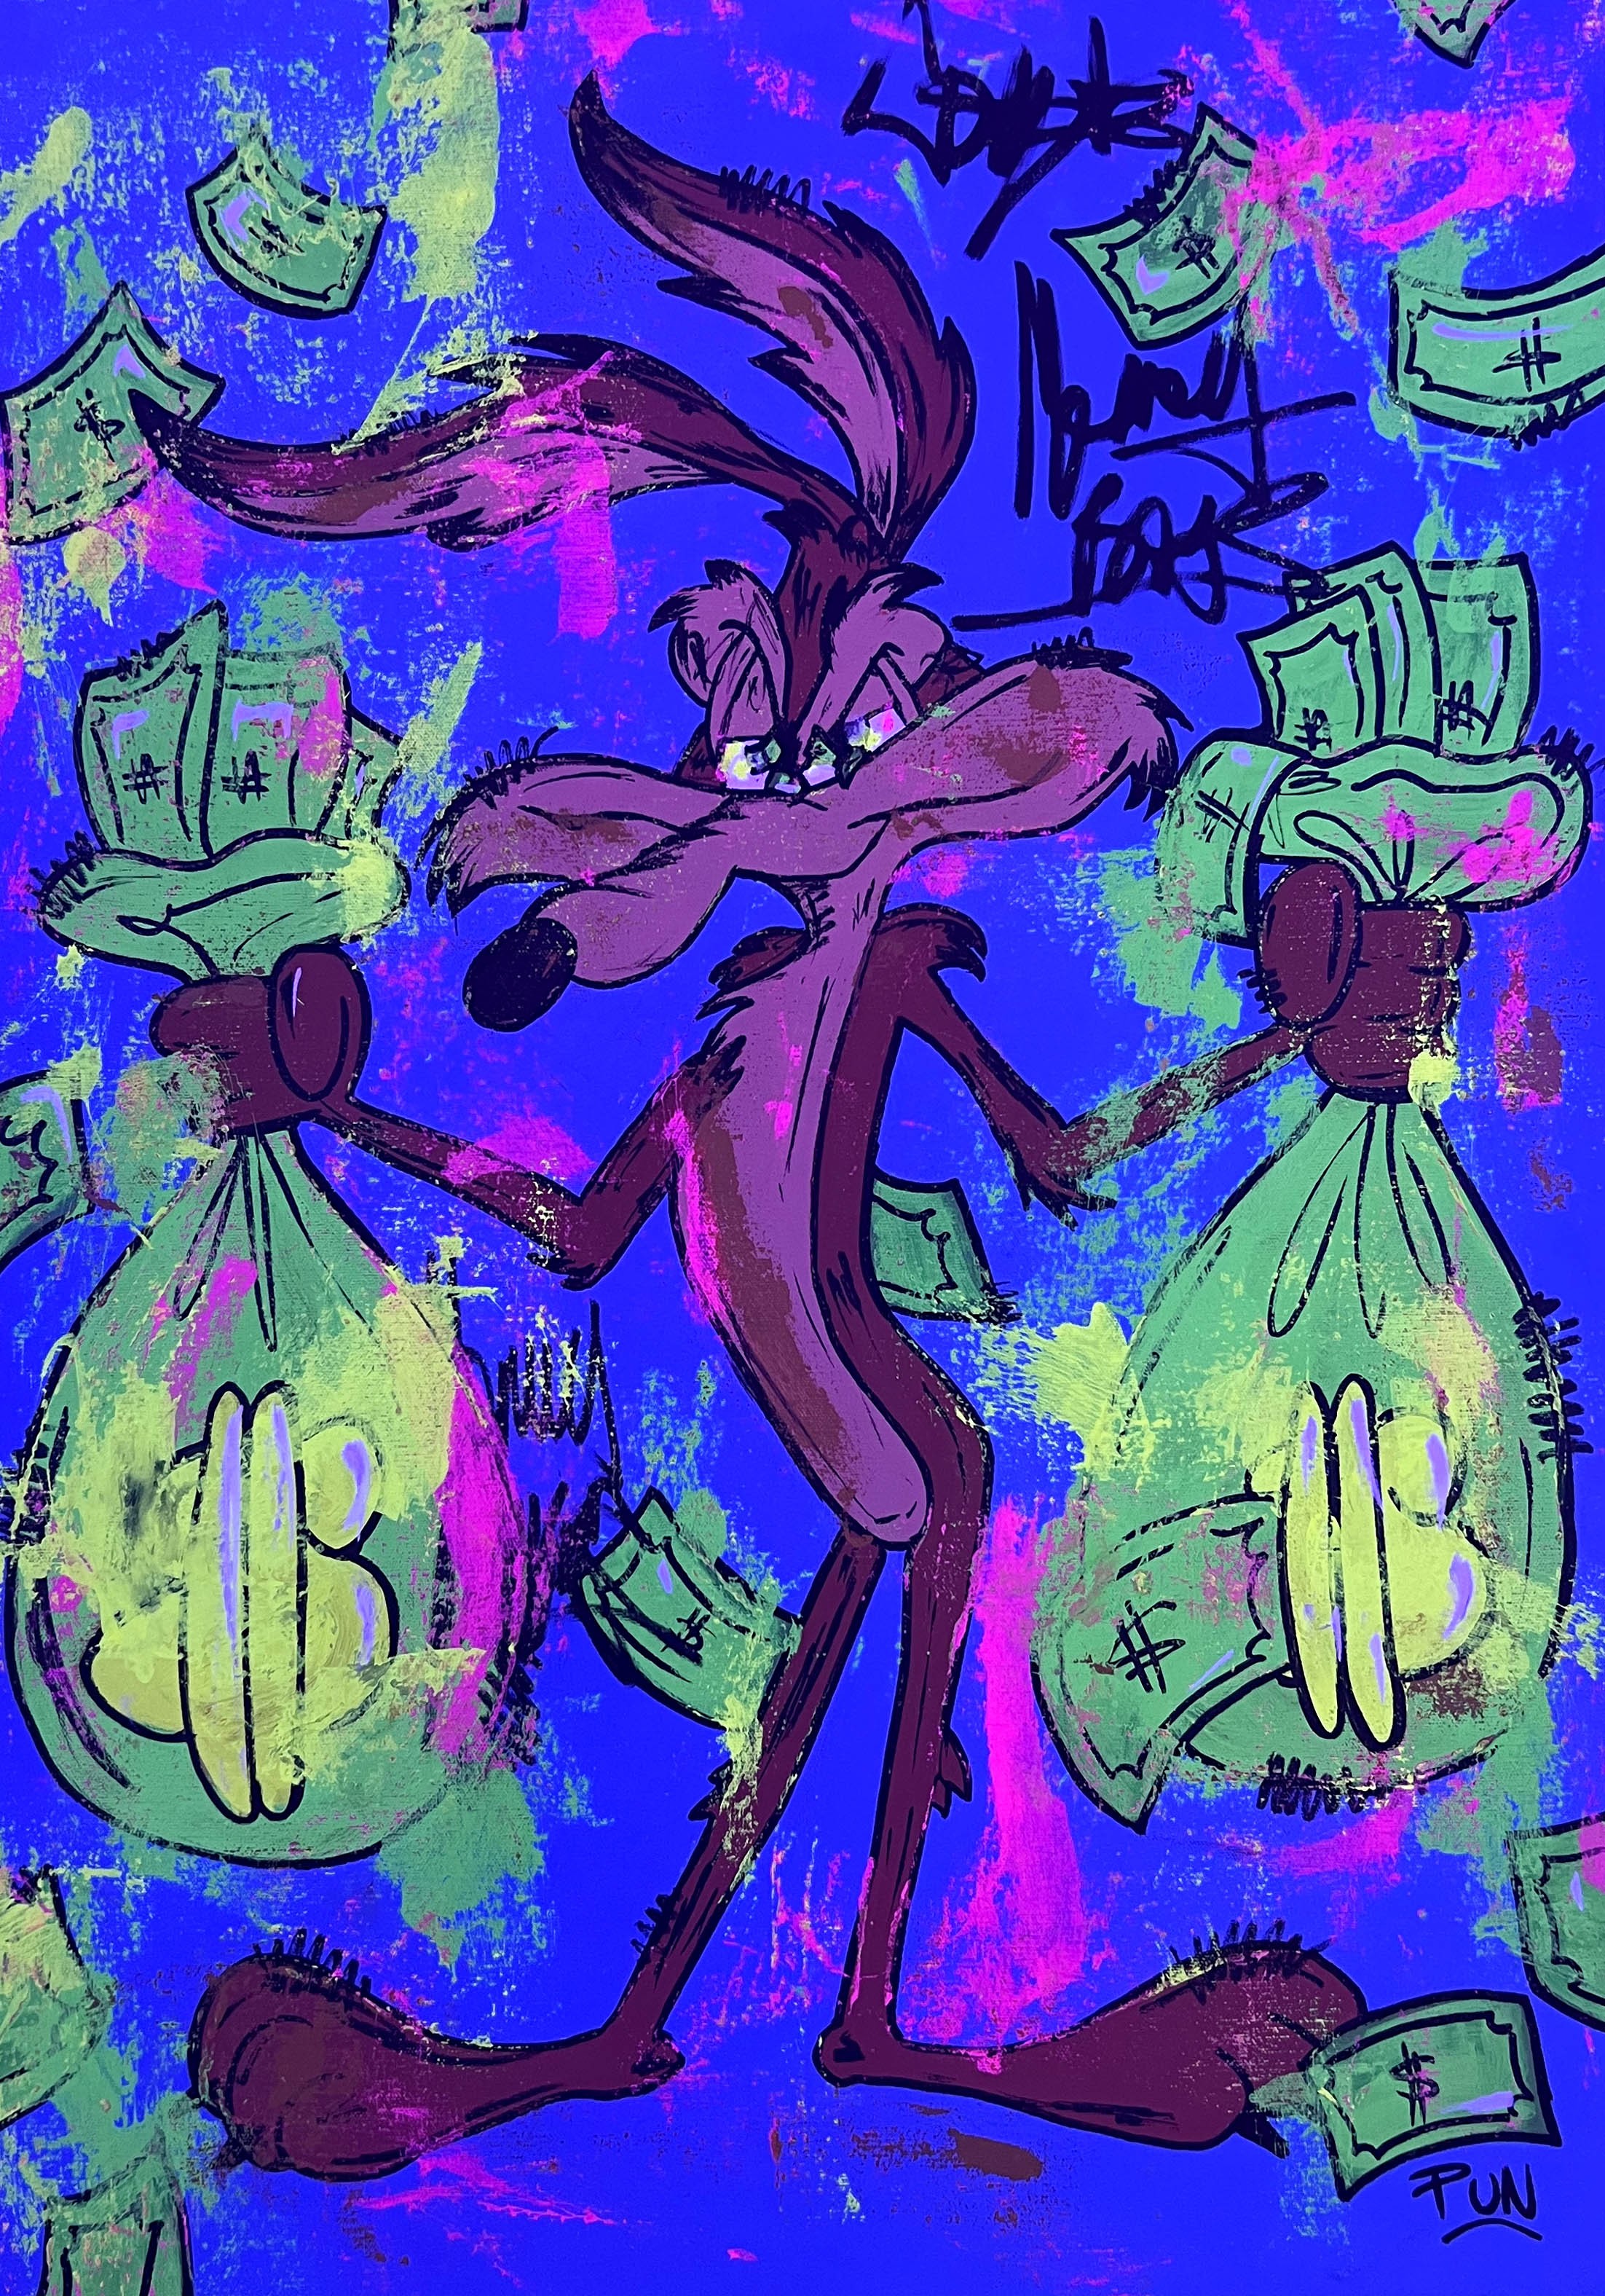 Wile E Coyote money bags by Carlos Pun Art, 2020 | Painting | Artsper ...